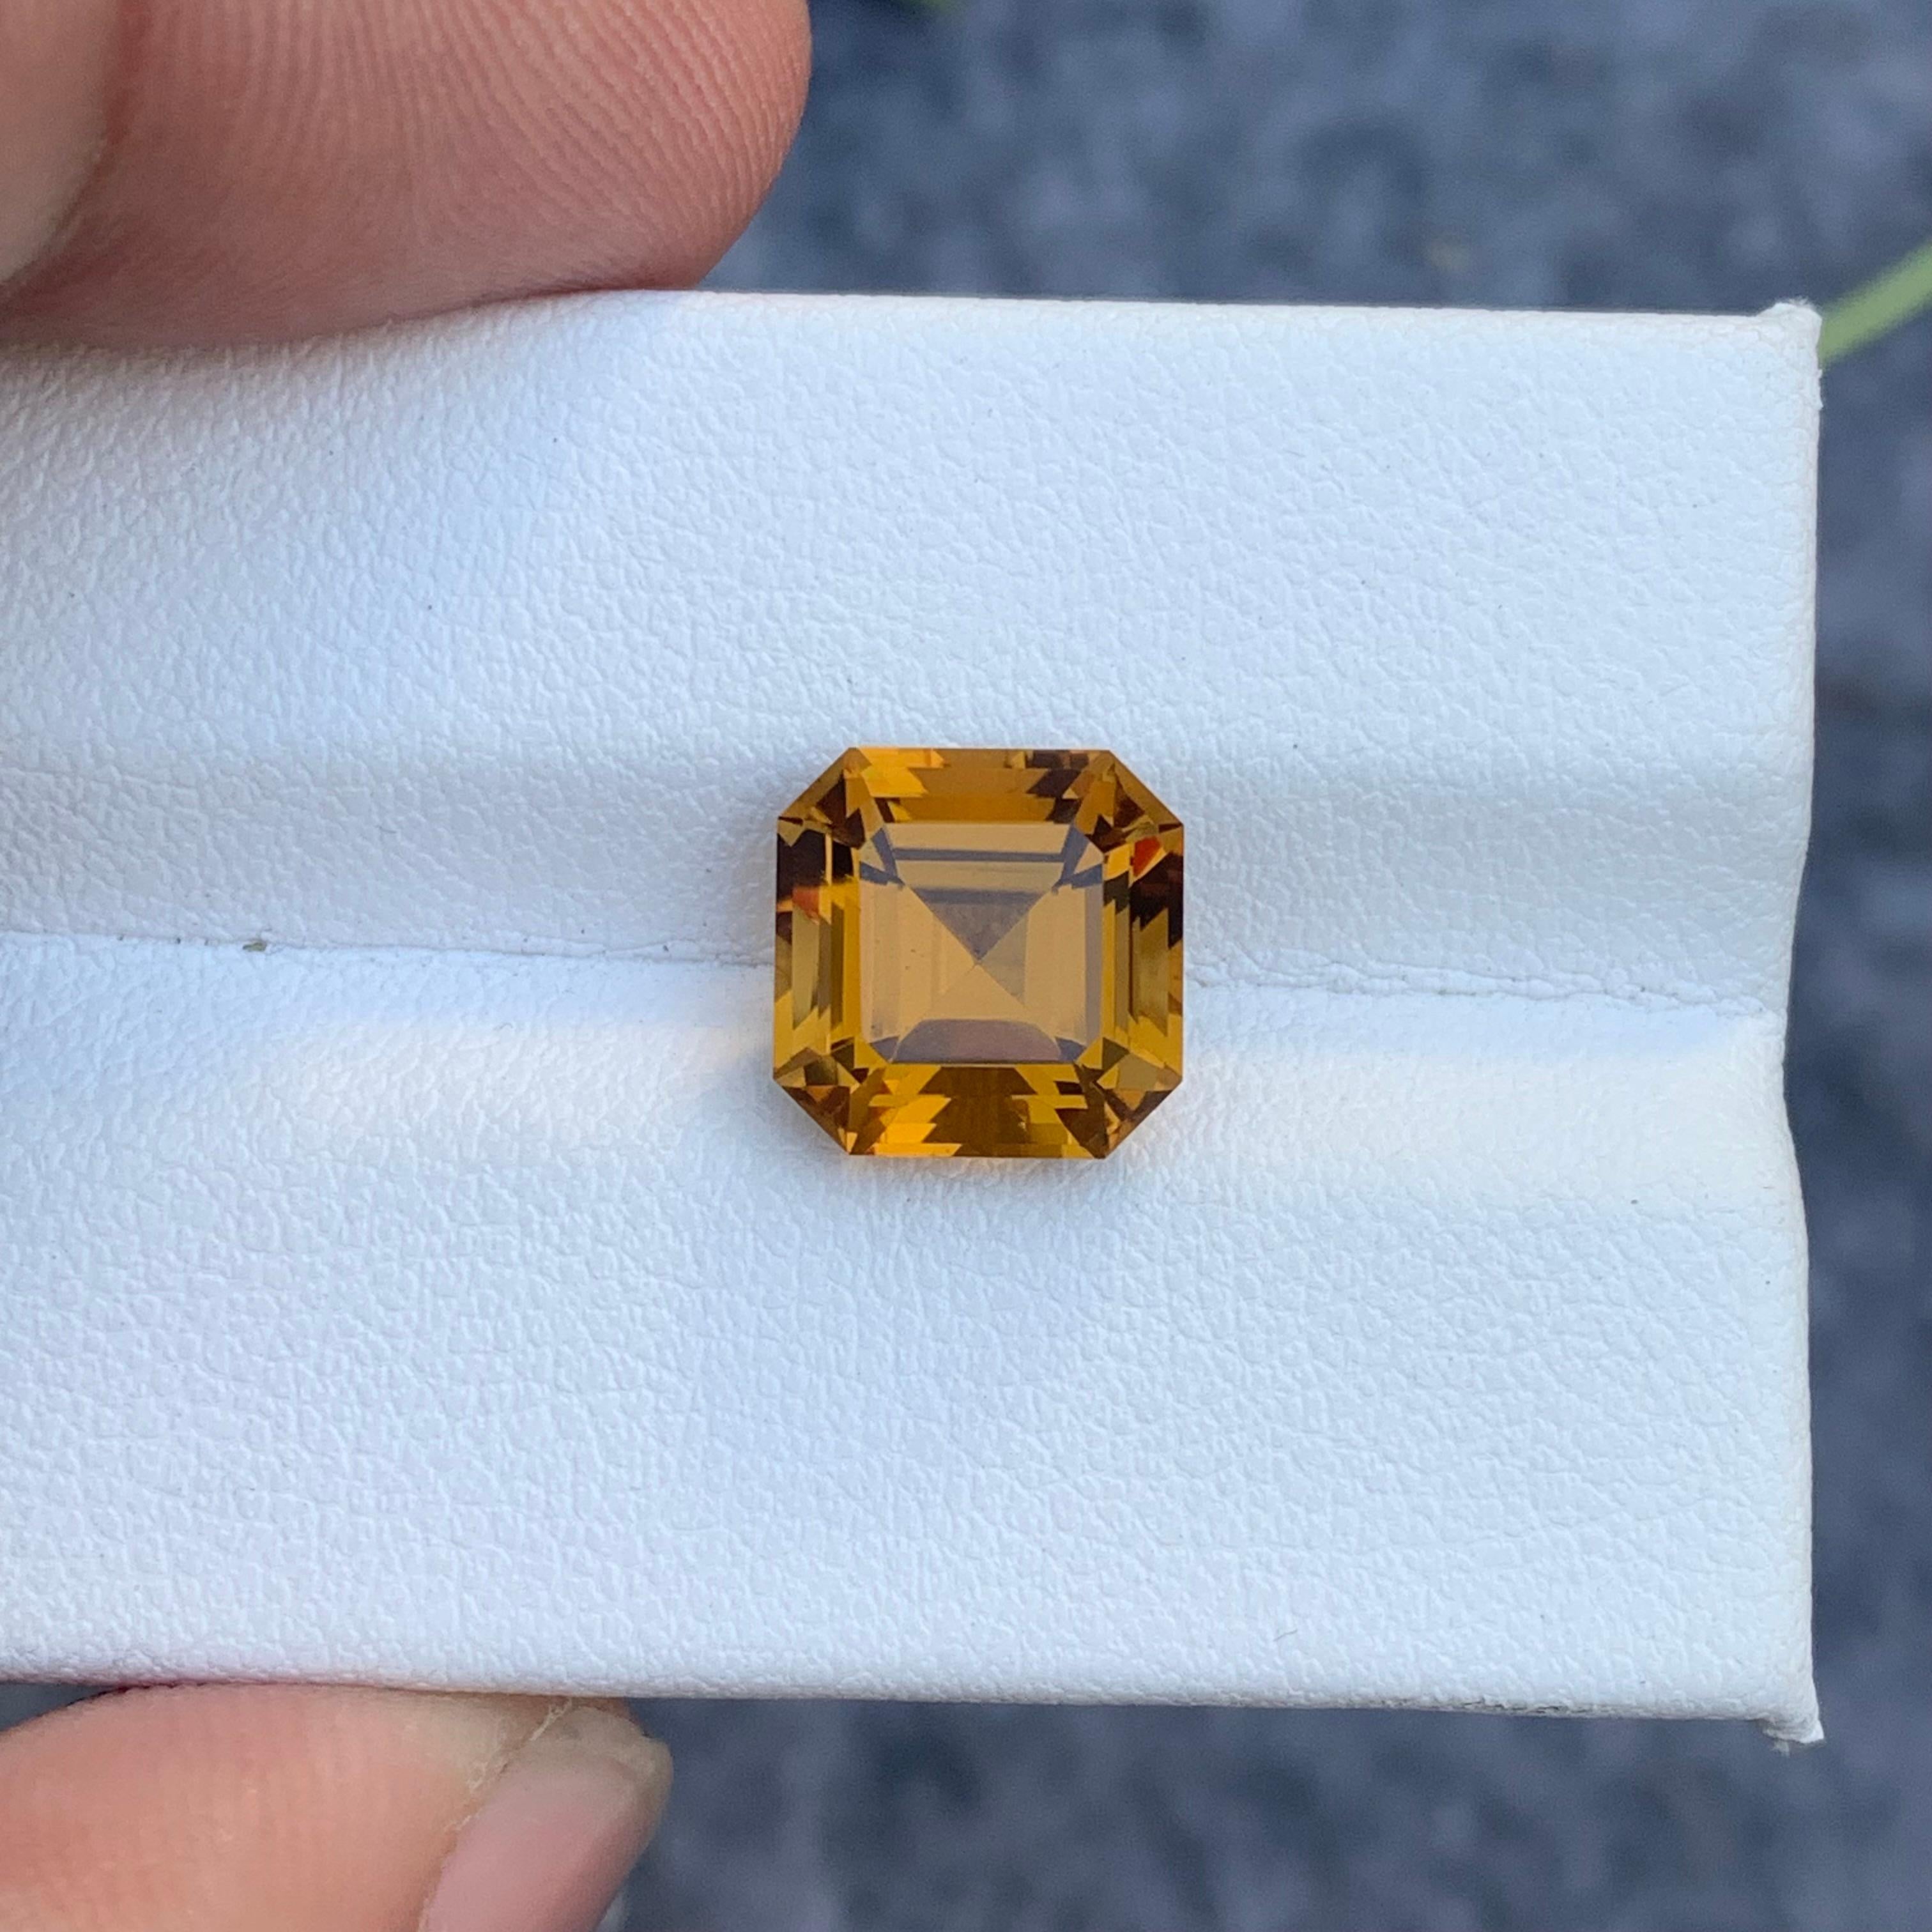 Faceted Honey Citrine
Weight : 4.45 Carats
Dimensions : 9.5x9.5x7.5 Mm
Clarity : Loupe Clean 
Origin : Brazil
Color: Brown 
Shape: Square Asscher
Certificate: On Demand
Month: November
.
The Many Healing Properties of Citrine
Increase Optimism, And